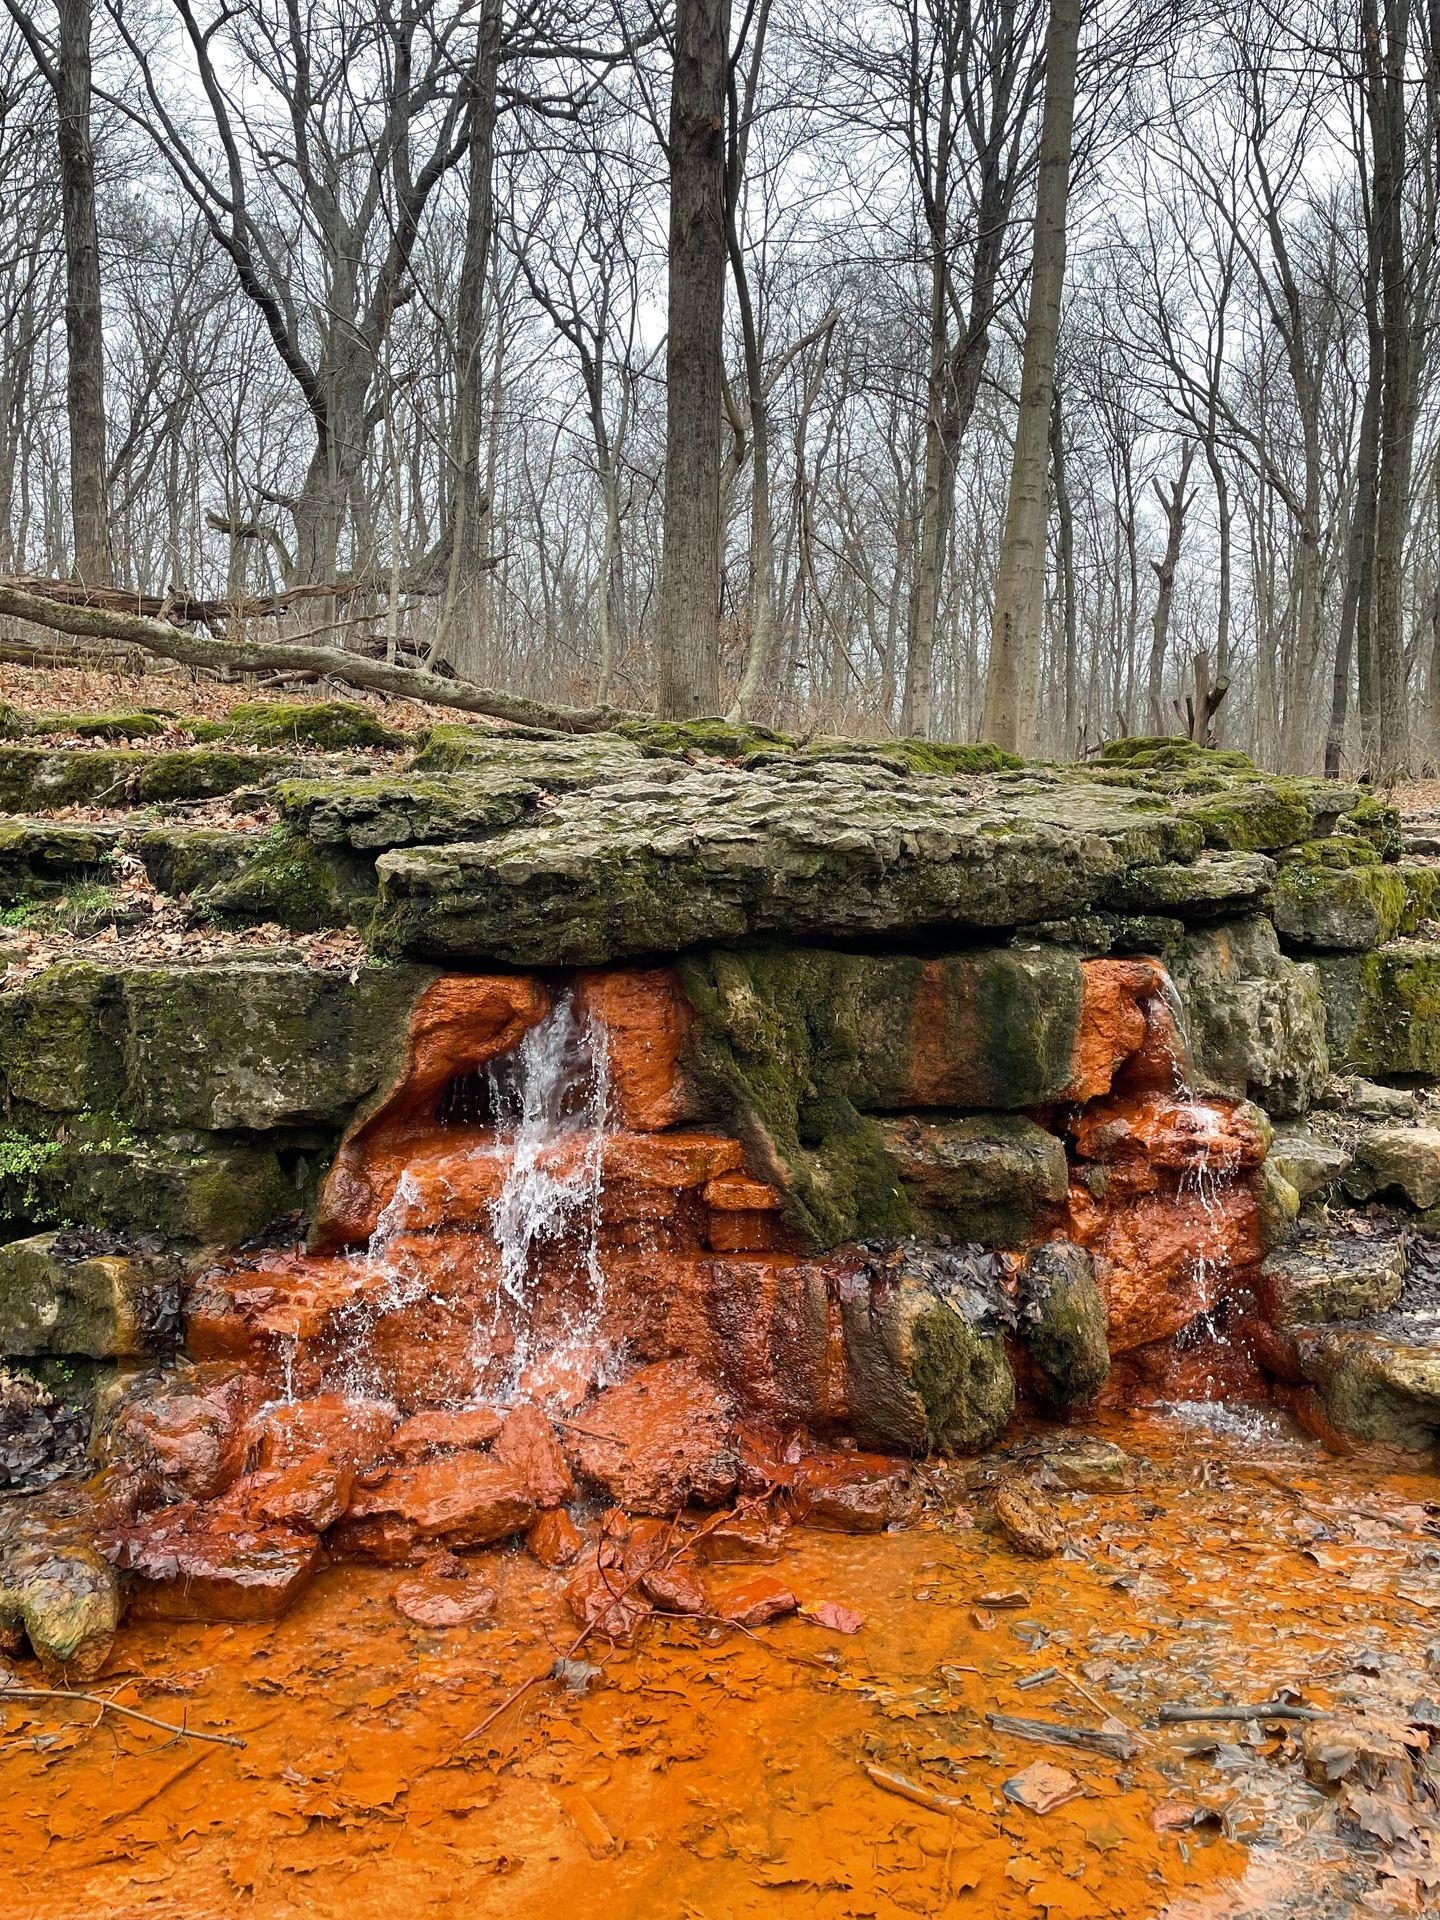 A spring flowing out of an area turned orange from iron